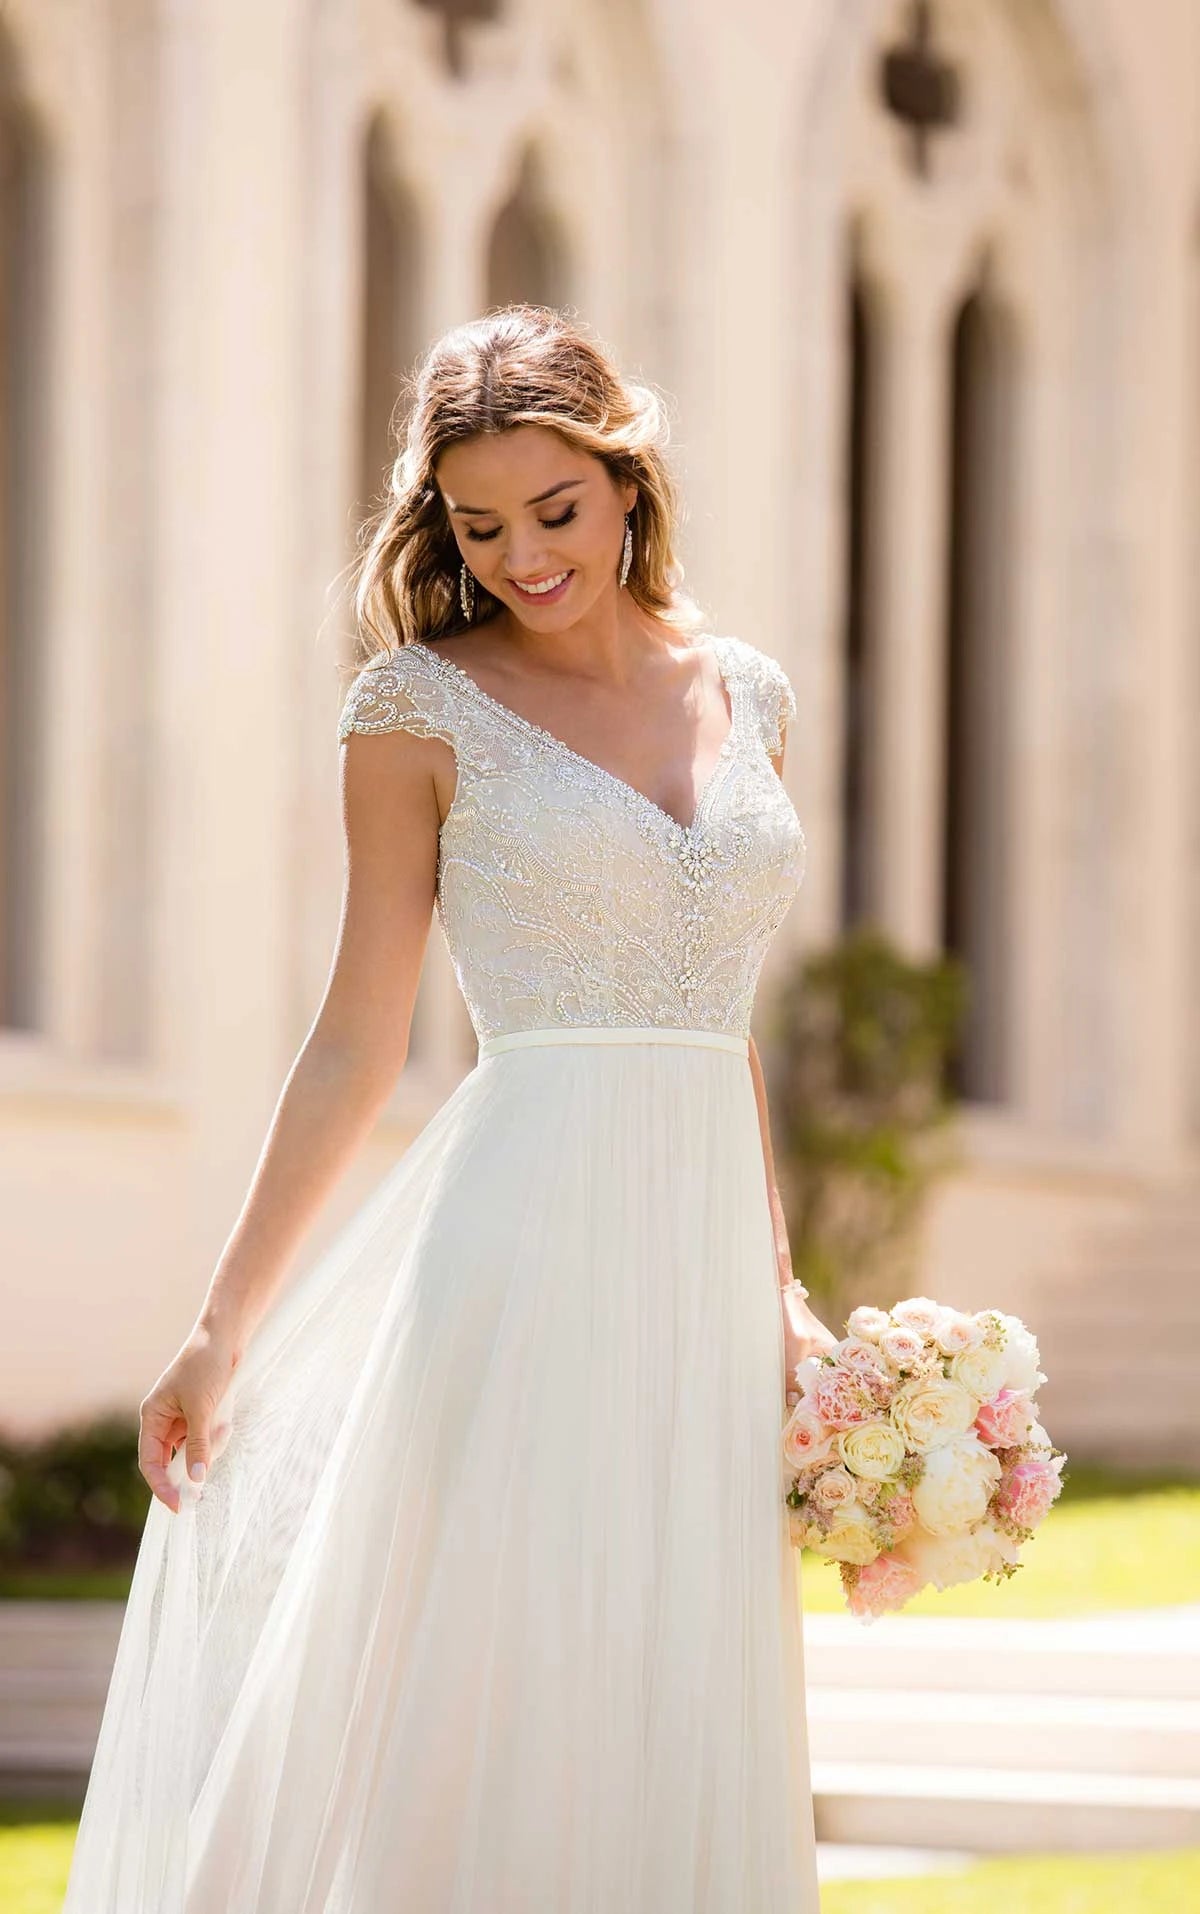 28 Casual Wedding Dresses And Outfits That Inspire | Clothes |  HappyWedd.com | Midi wedding dress, Casual wedding dress, Casual bride